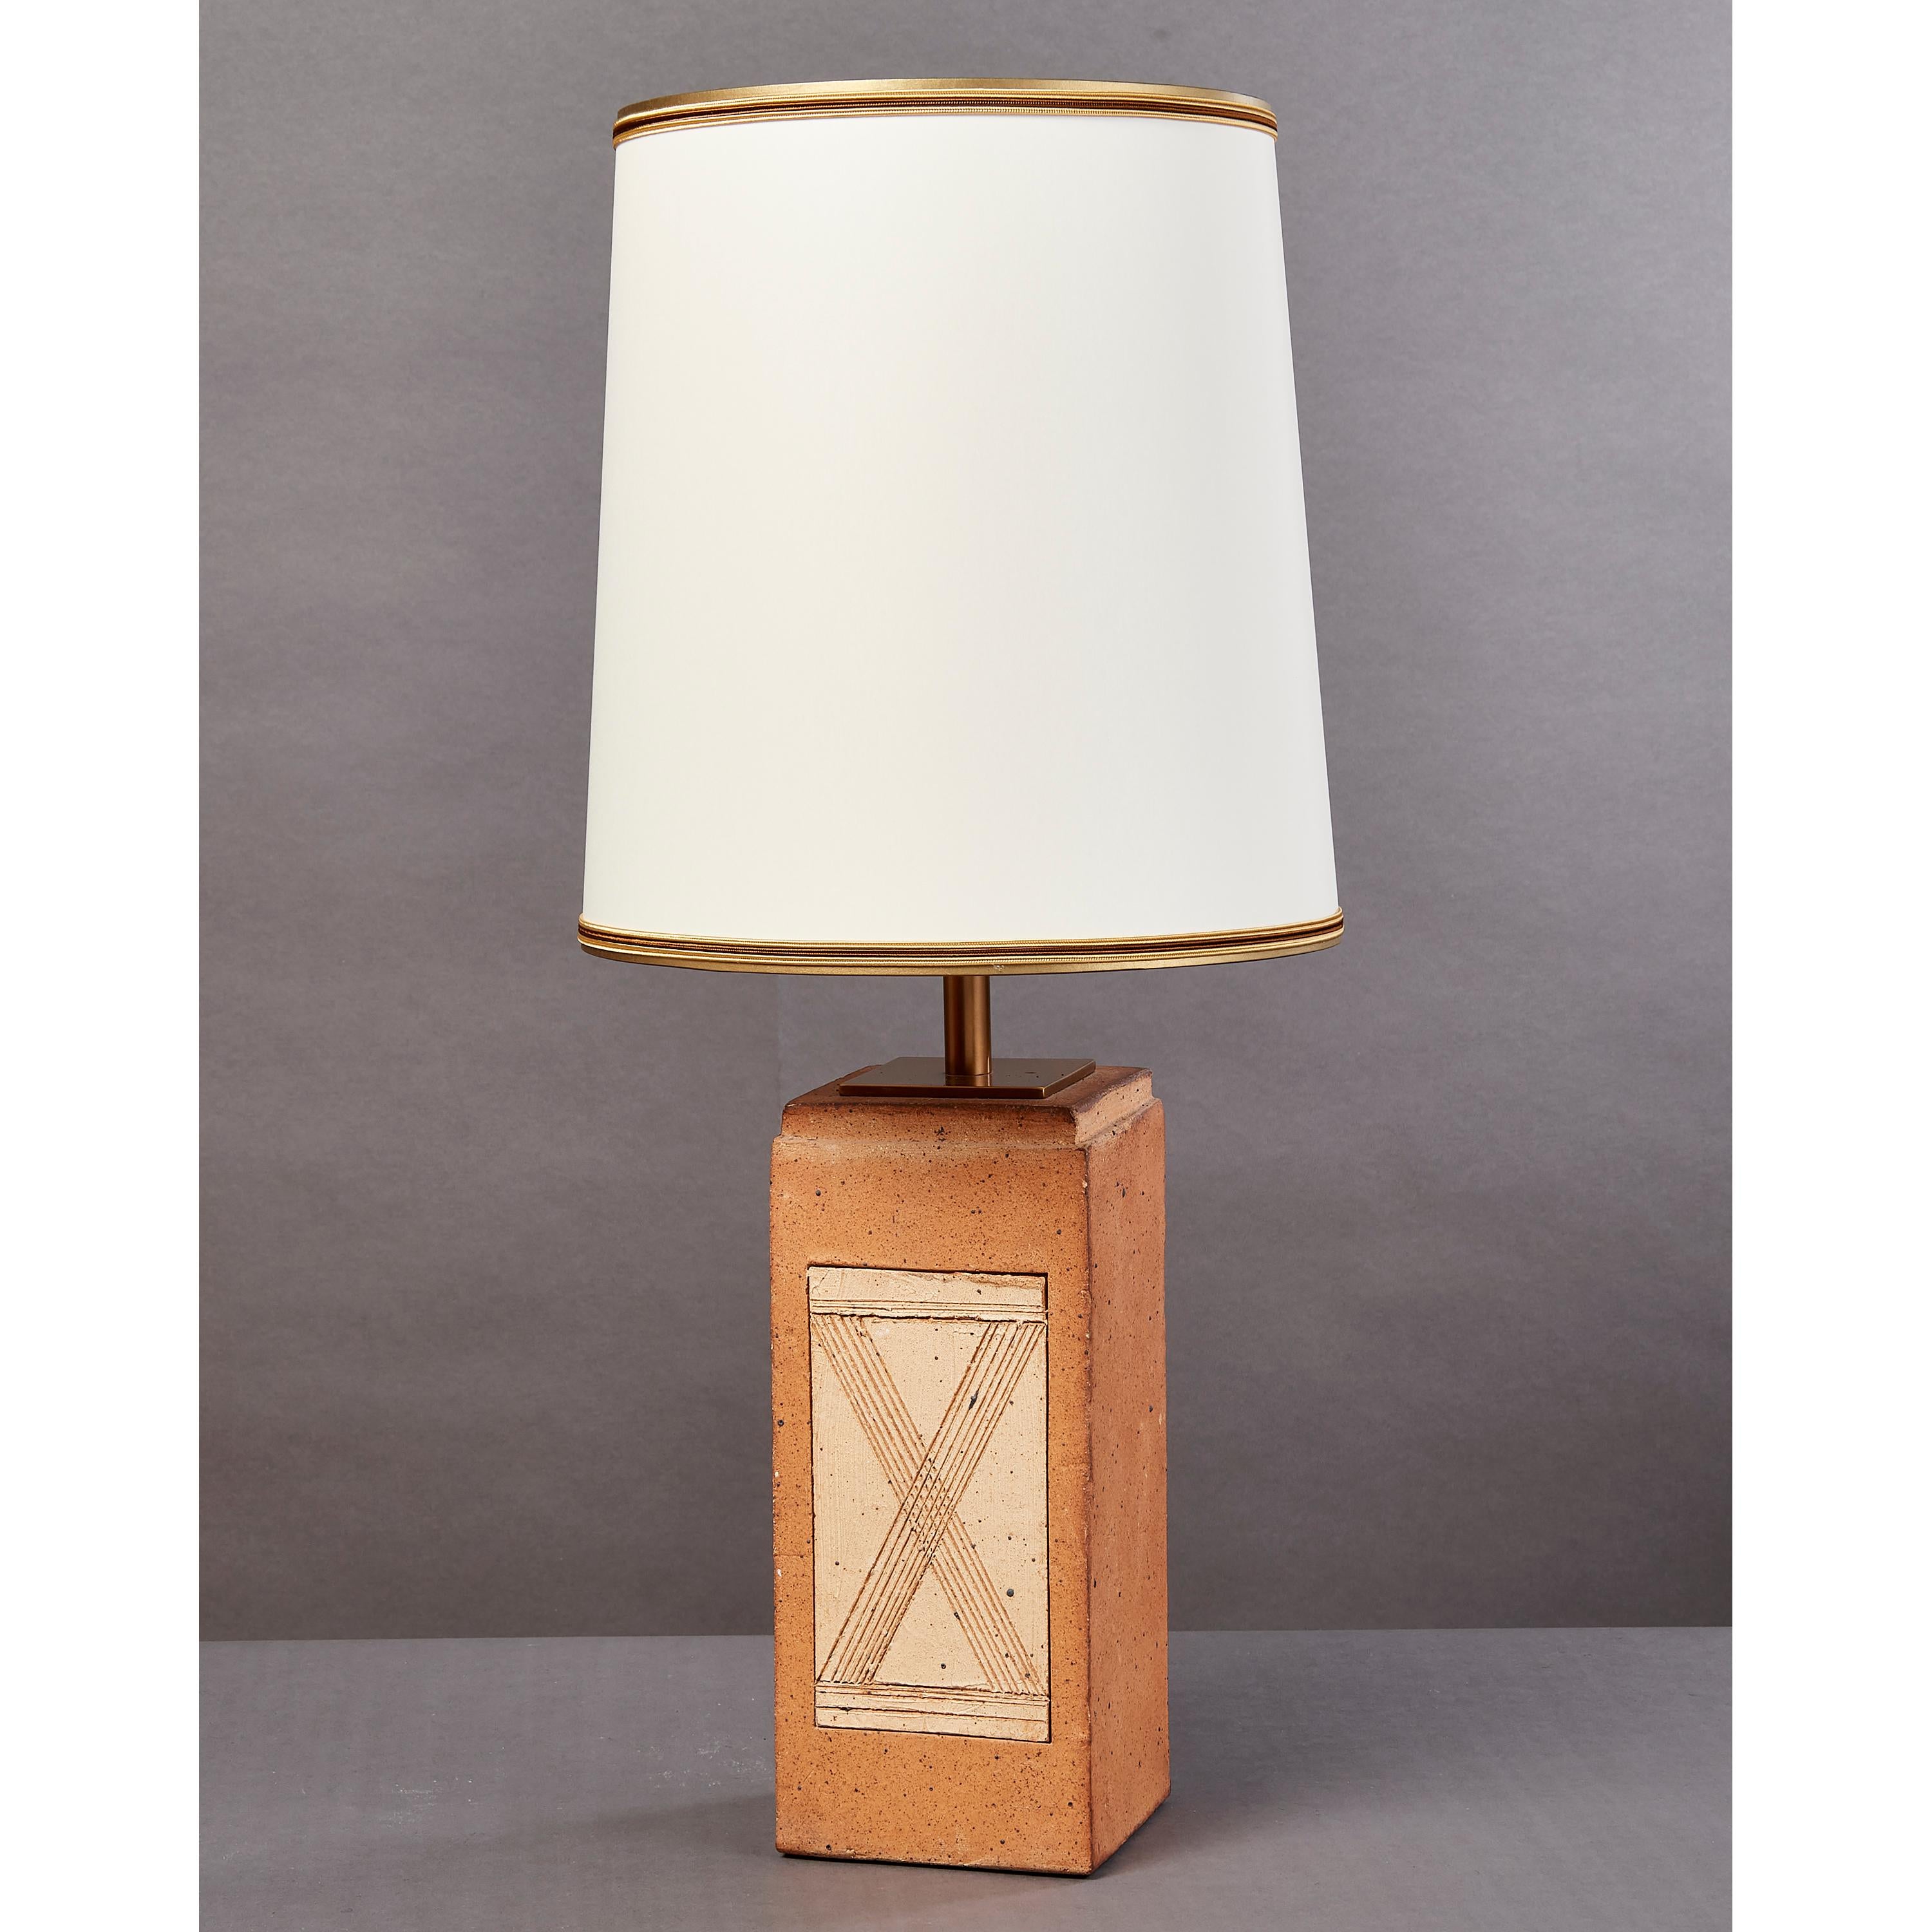 France, 1970s
Geometric fired ceramic lamp with incised abstract geometric motifs
Rewired for use in the US with one standard base bulb
One of a collection of French, 1970s fired ceramic lamps, see last two images for two oval shaped